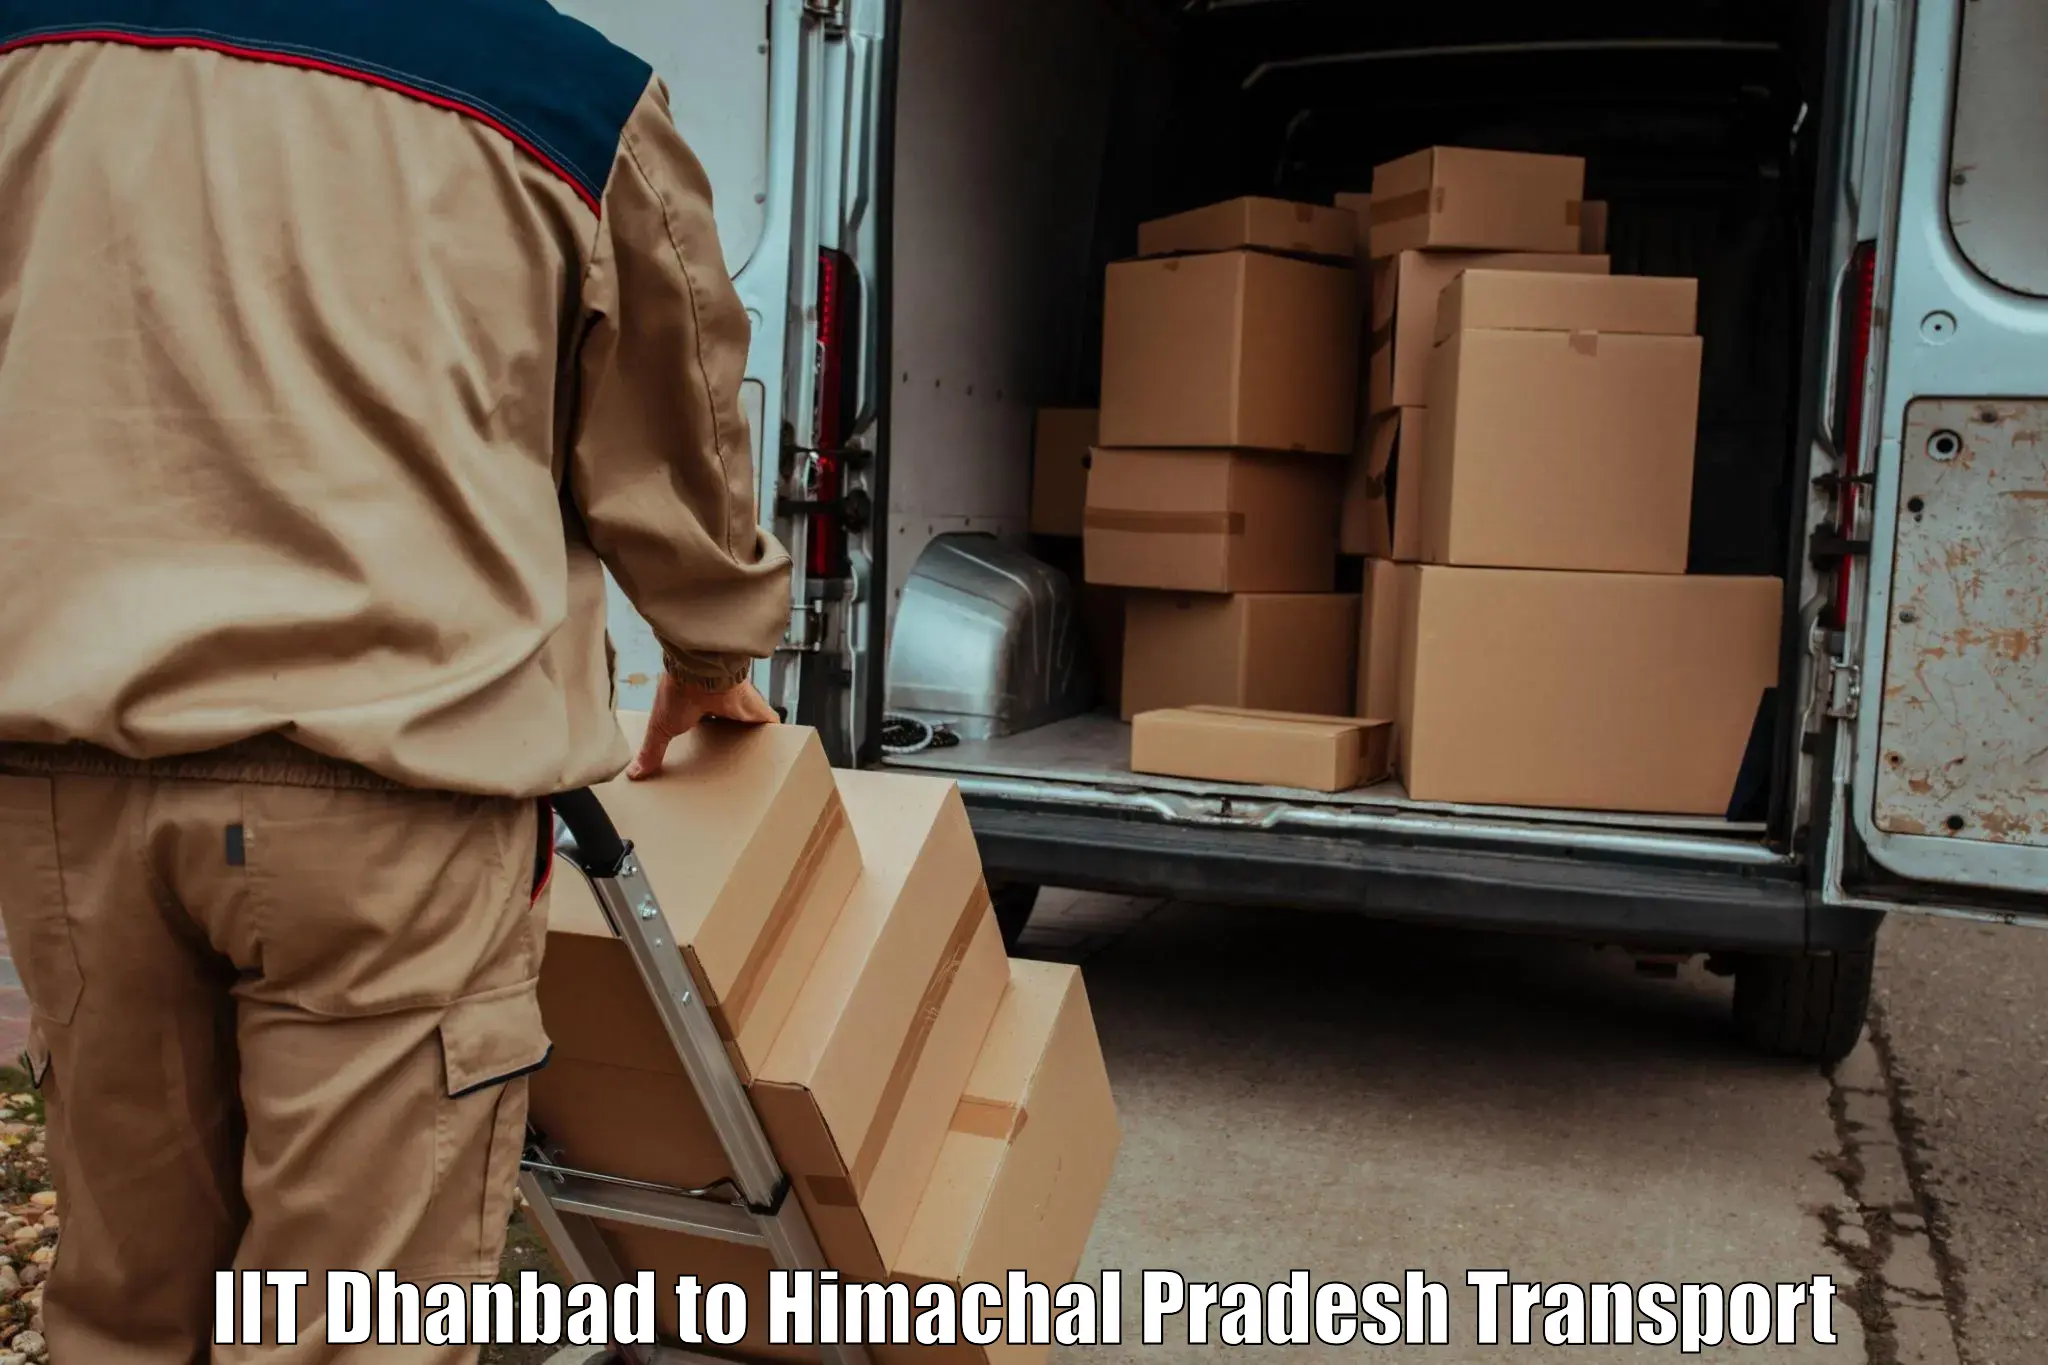 Lorry transport service IIT Dhanbad to Solan